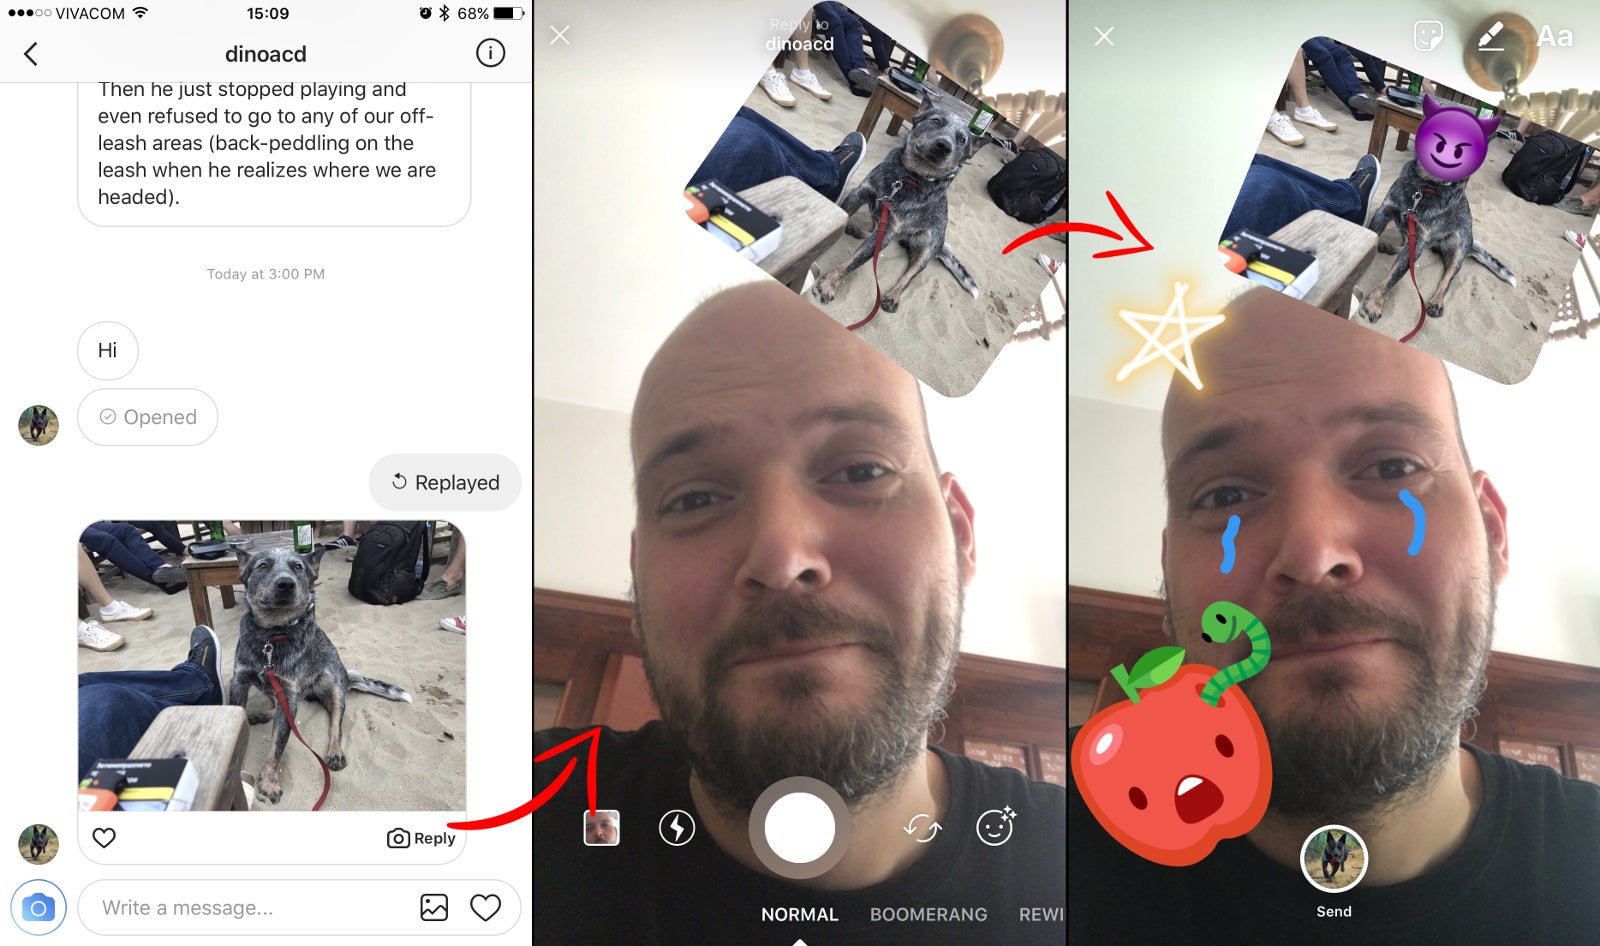 Instagram adds fun photo reply feature to its DM interface